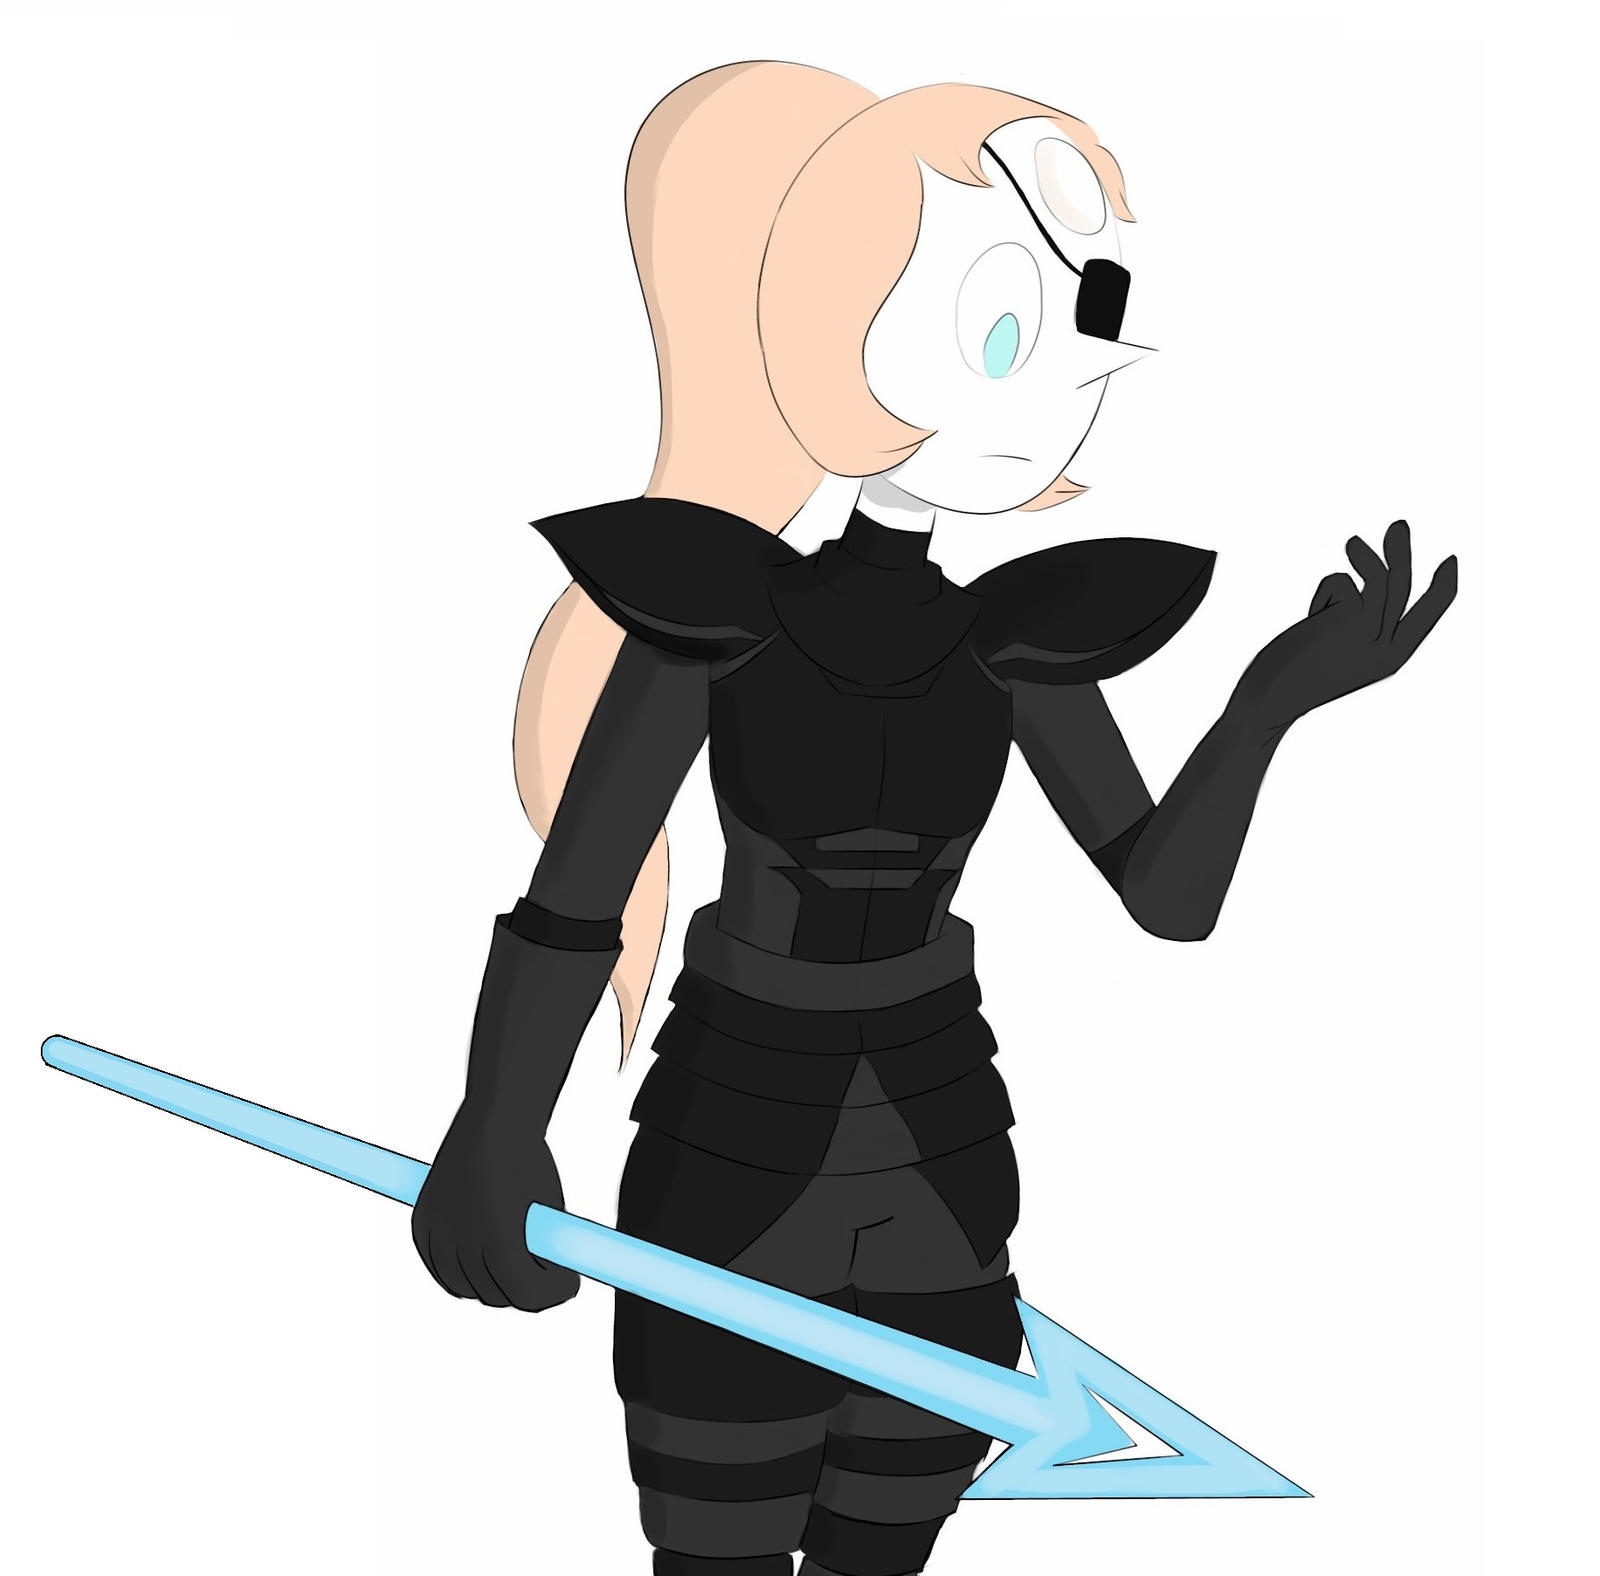 Pearl In Undynes Armor By ArbitraryLabby On DeviantArt.